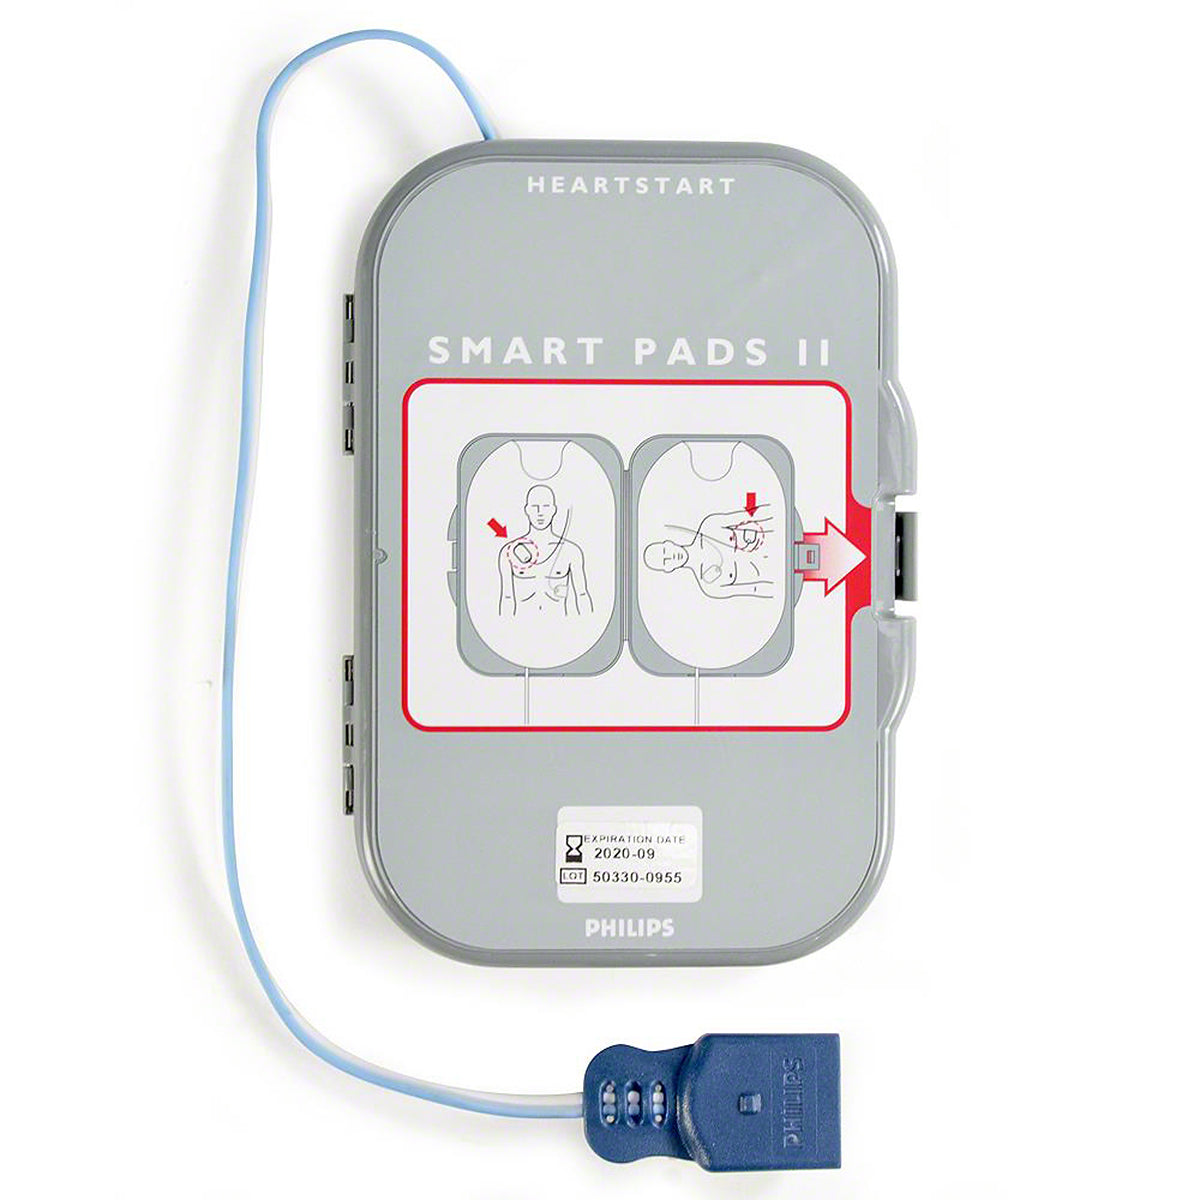 Ever Ready First Aid complete emergency kit with Philips AED, Defibrillation pads, and Beaty CPR (Adults and Children)